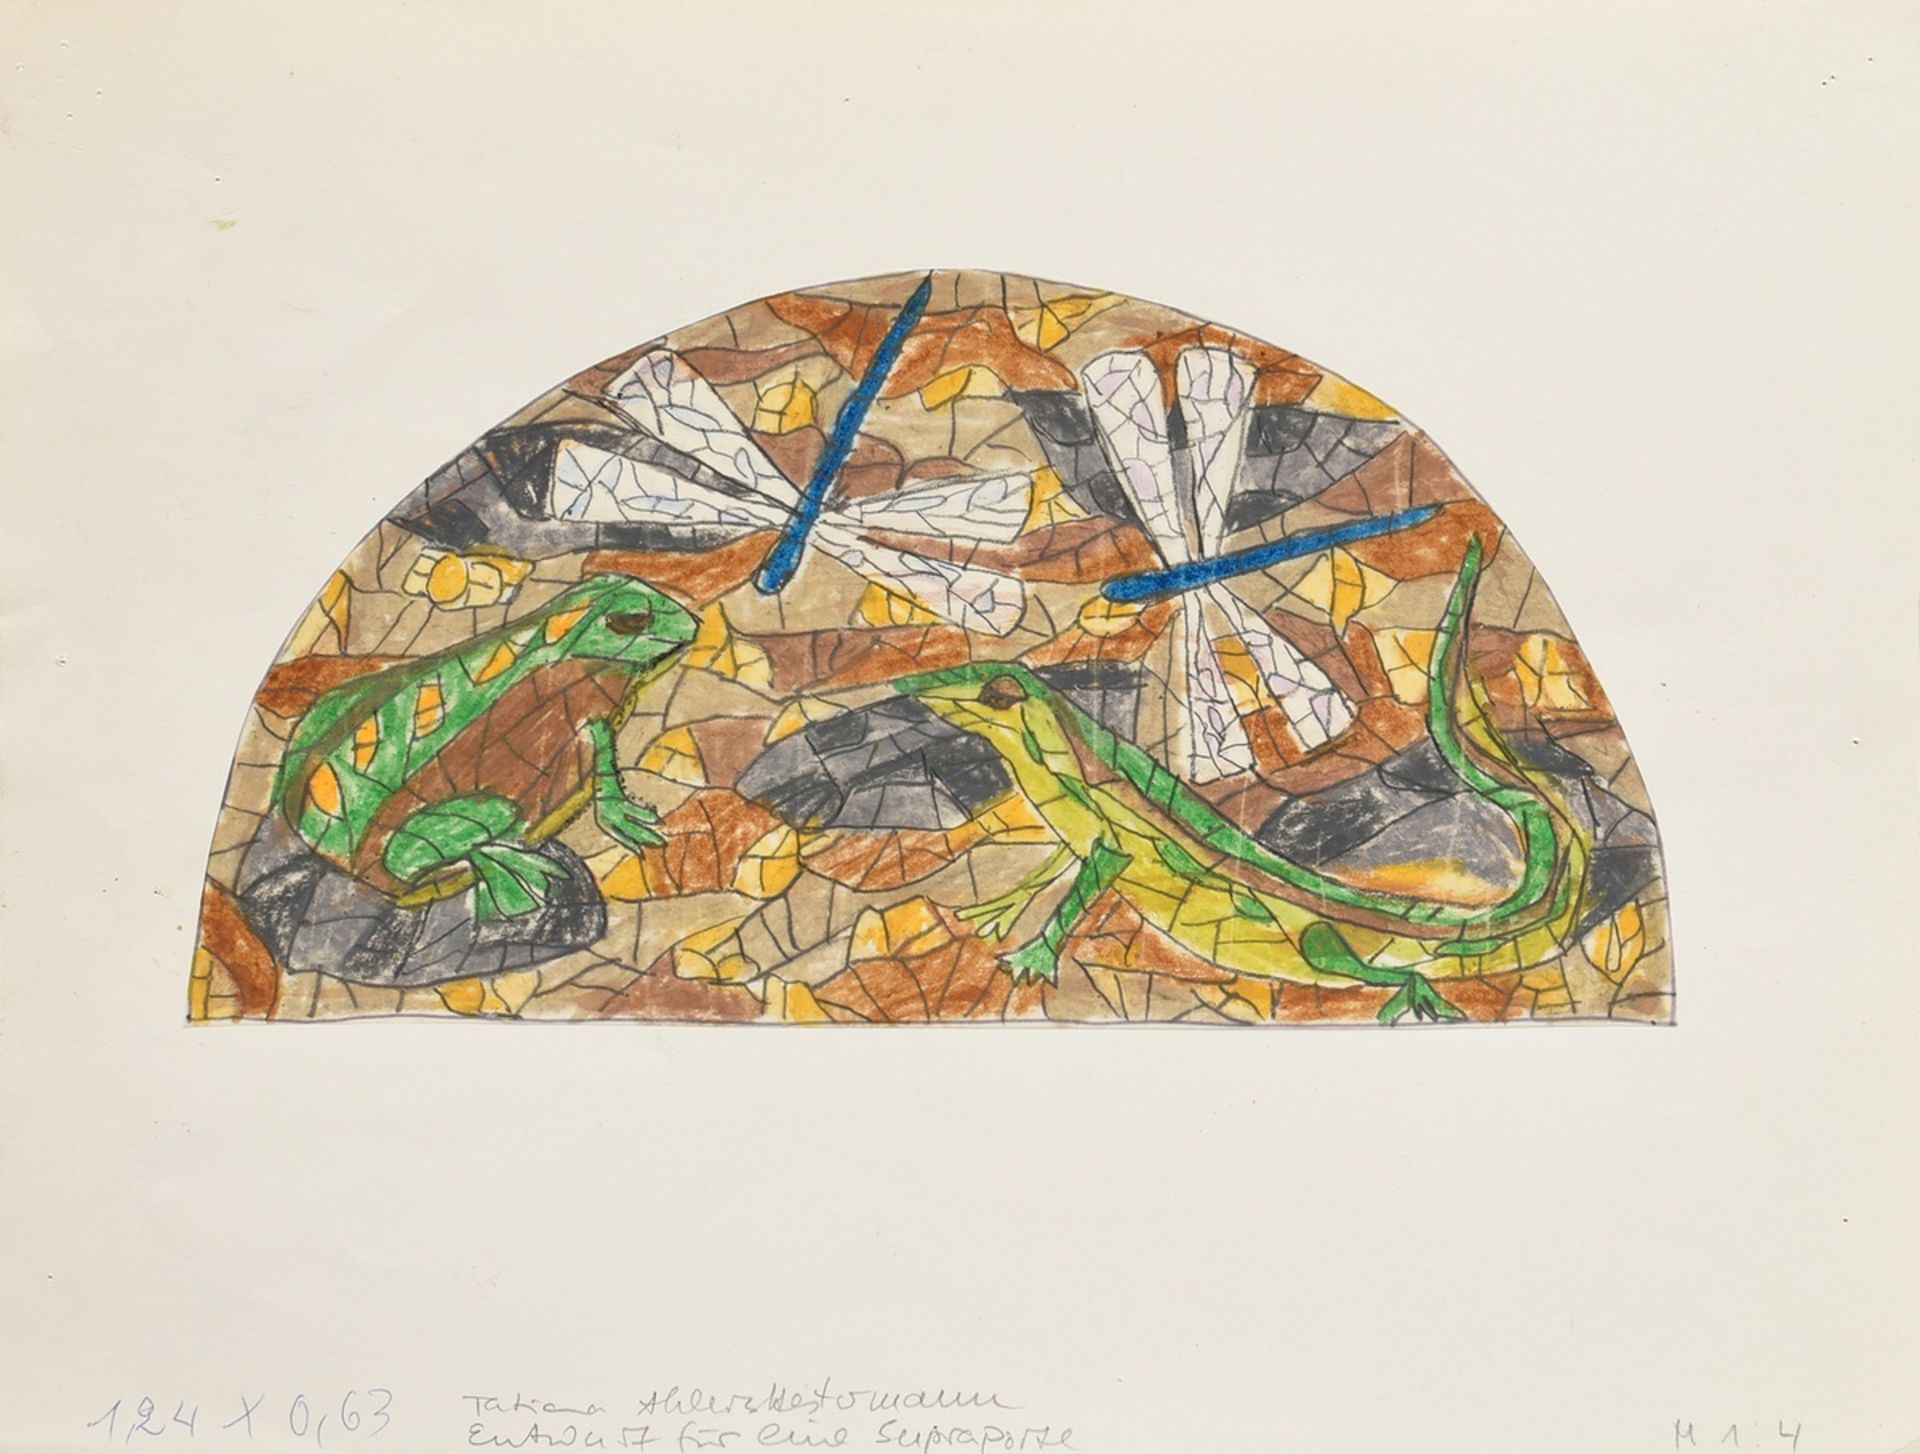 3 Ahlers-Hestermann, Tatiana (1919-2000) "Mosaic designs for a supraporte in a housing estate" (sca - Image 4 of 4